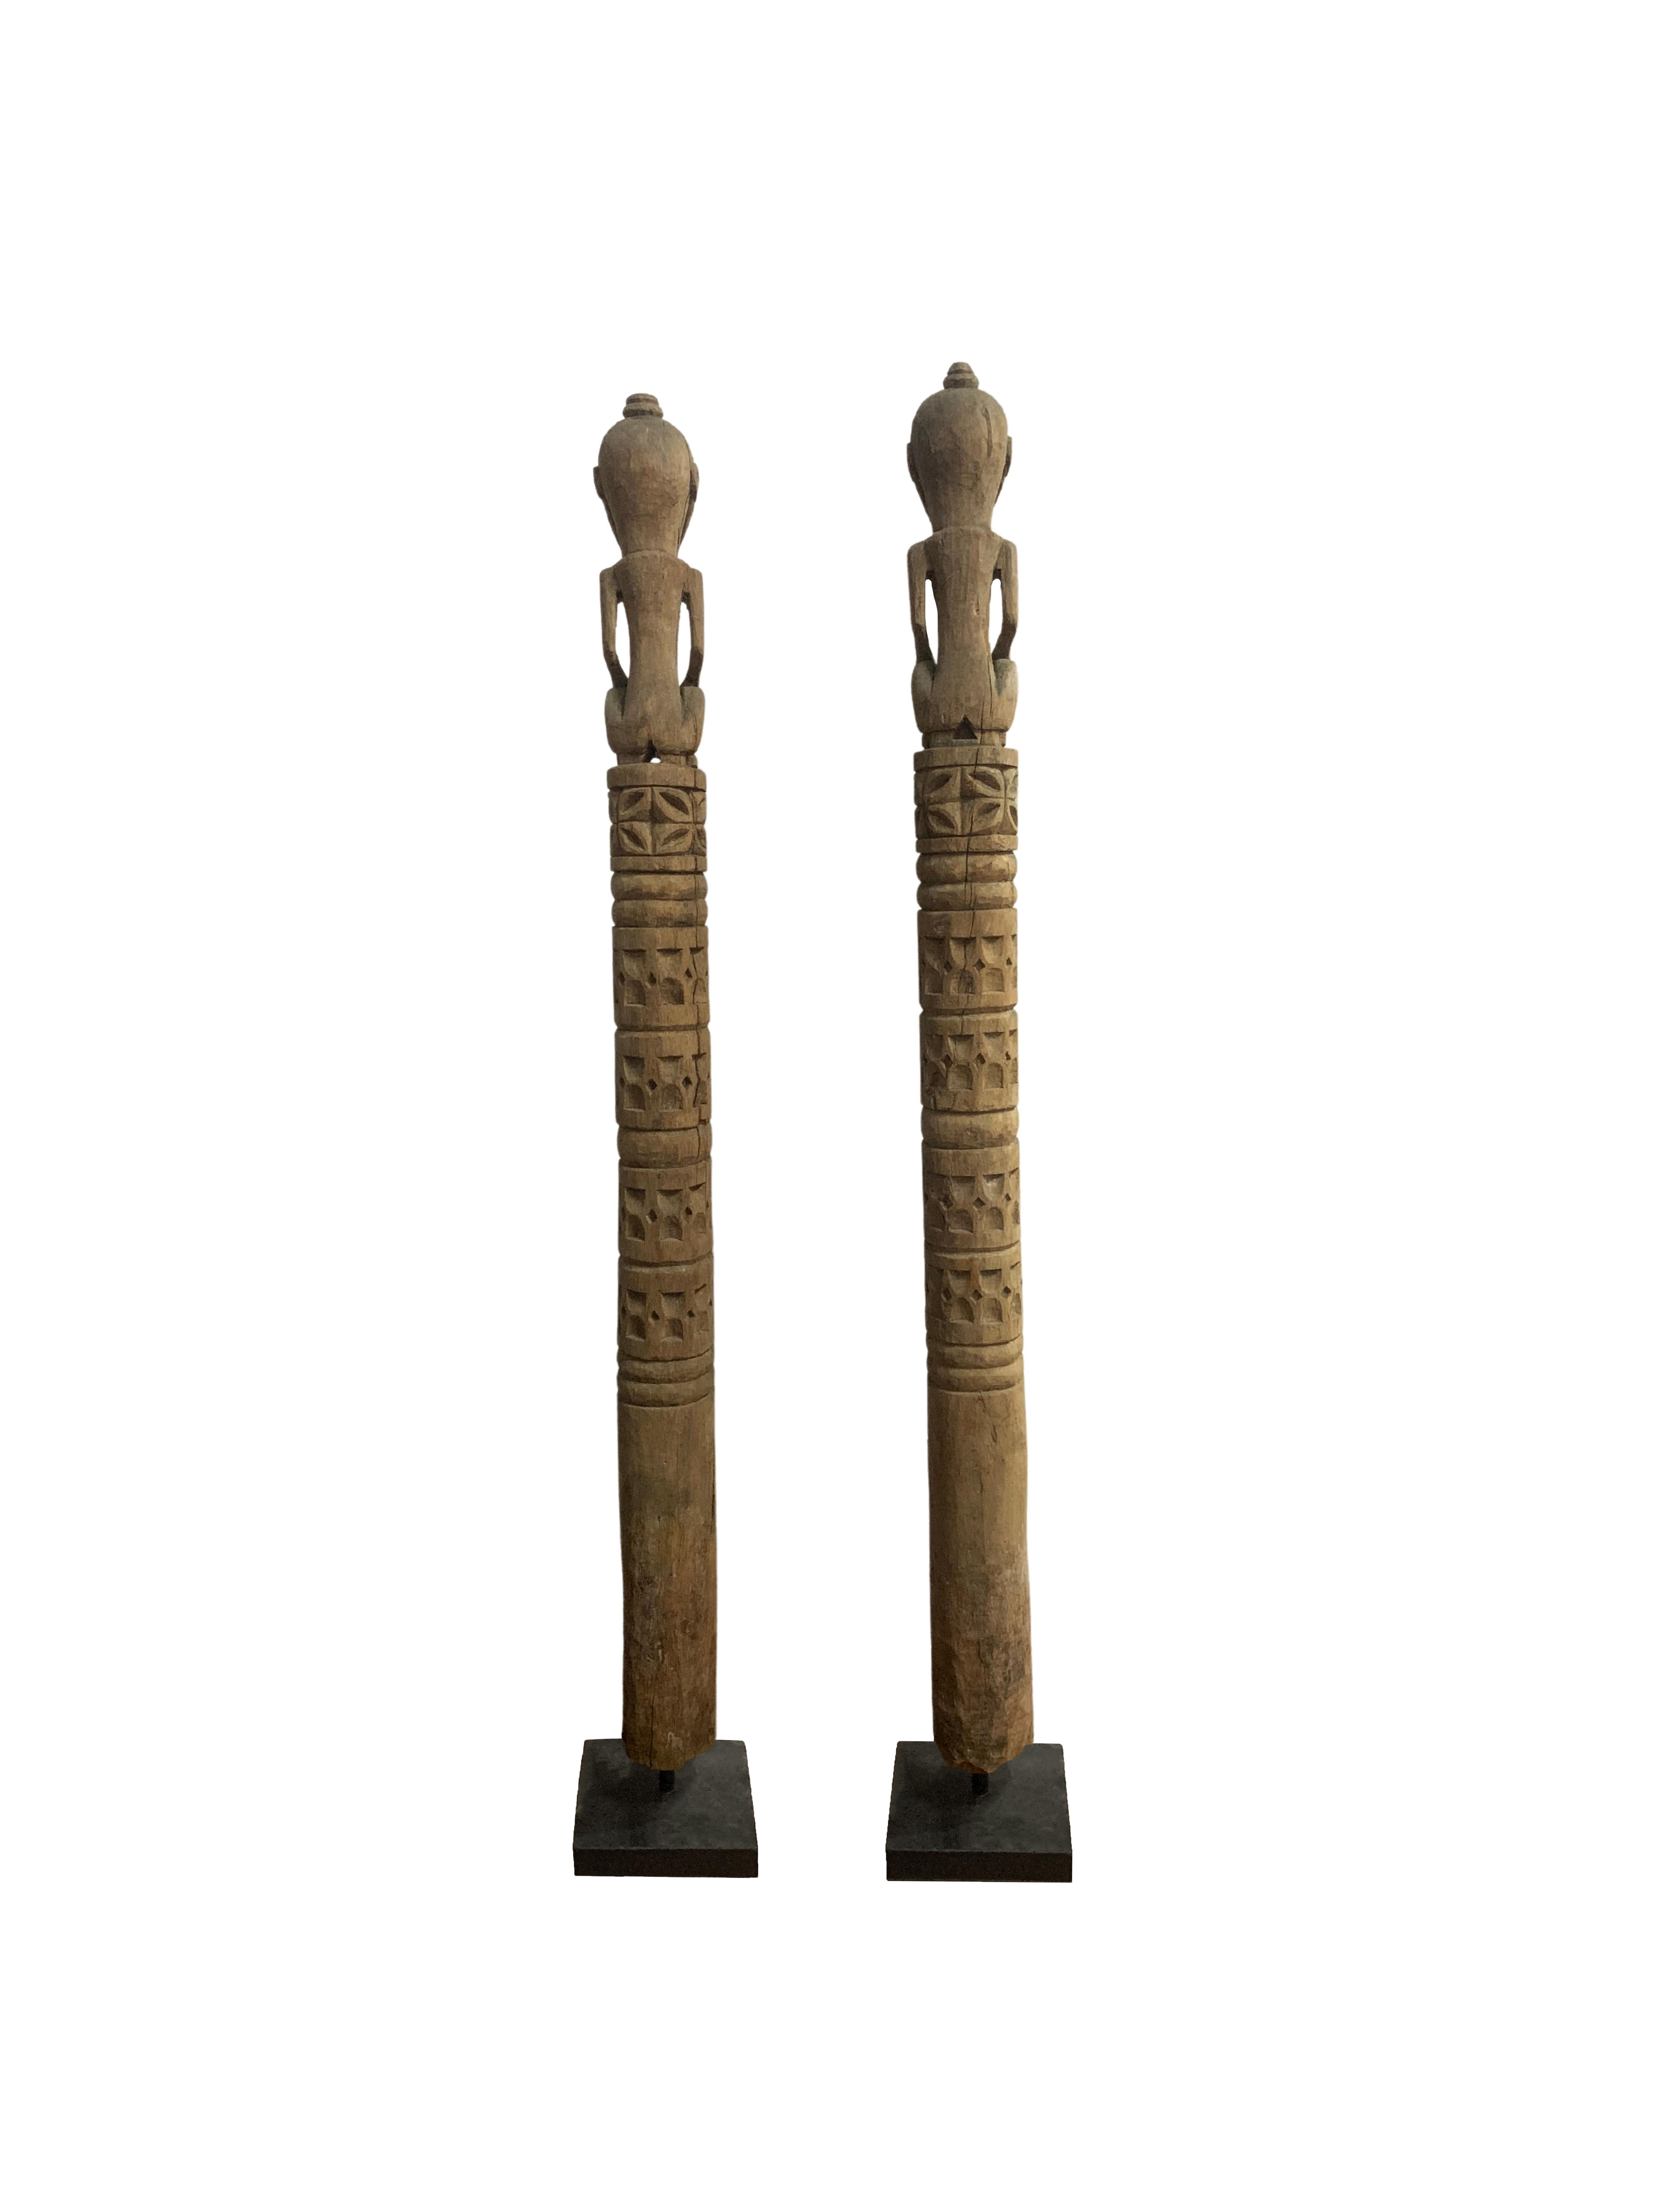 Hand-Carved Pair of Wooden Tribal Sculpture / Carving of Ancestral Figures, Timor, Indonesia